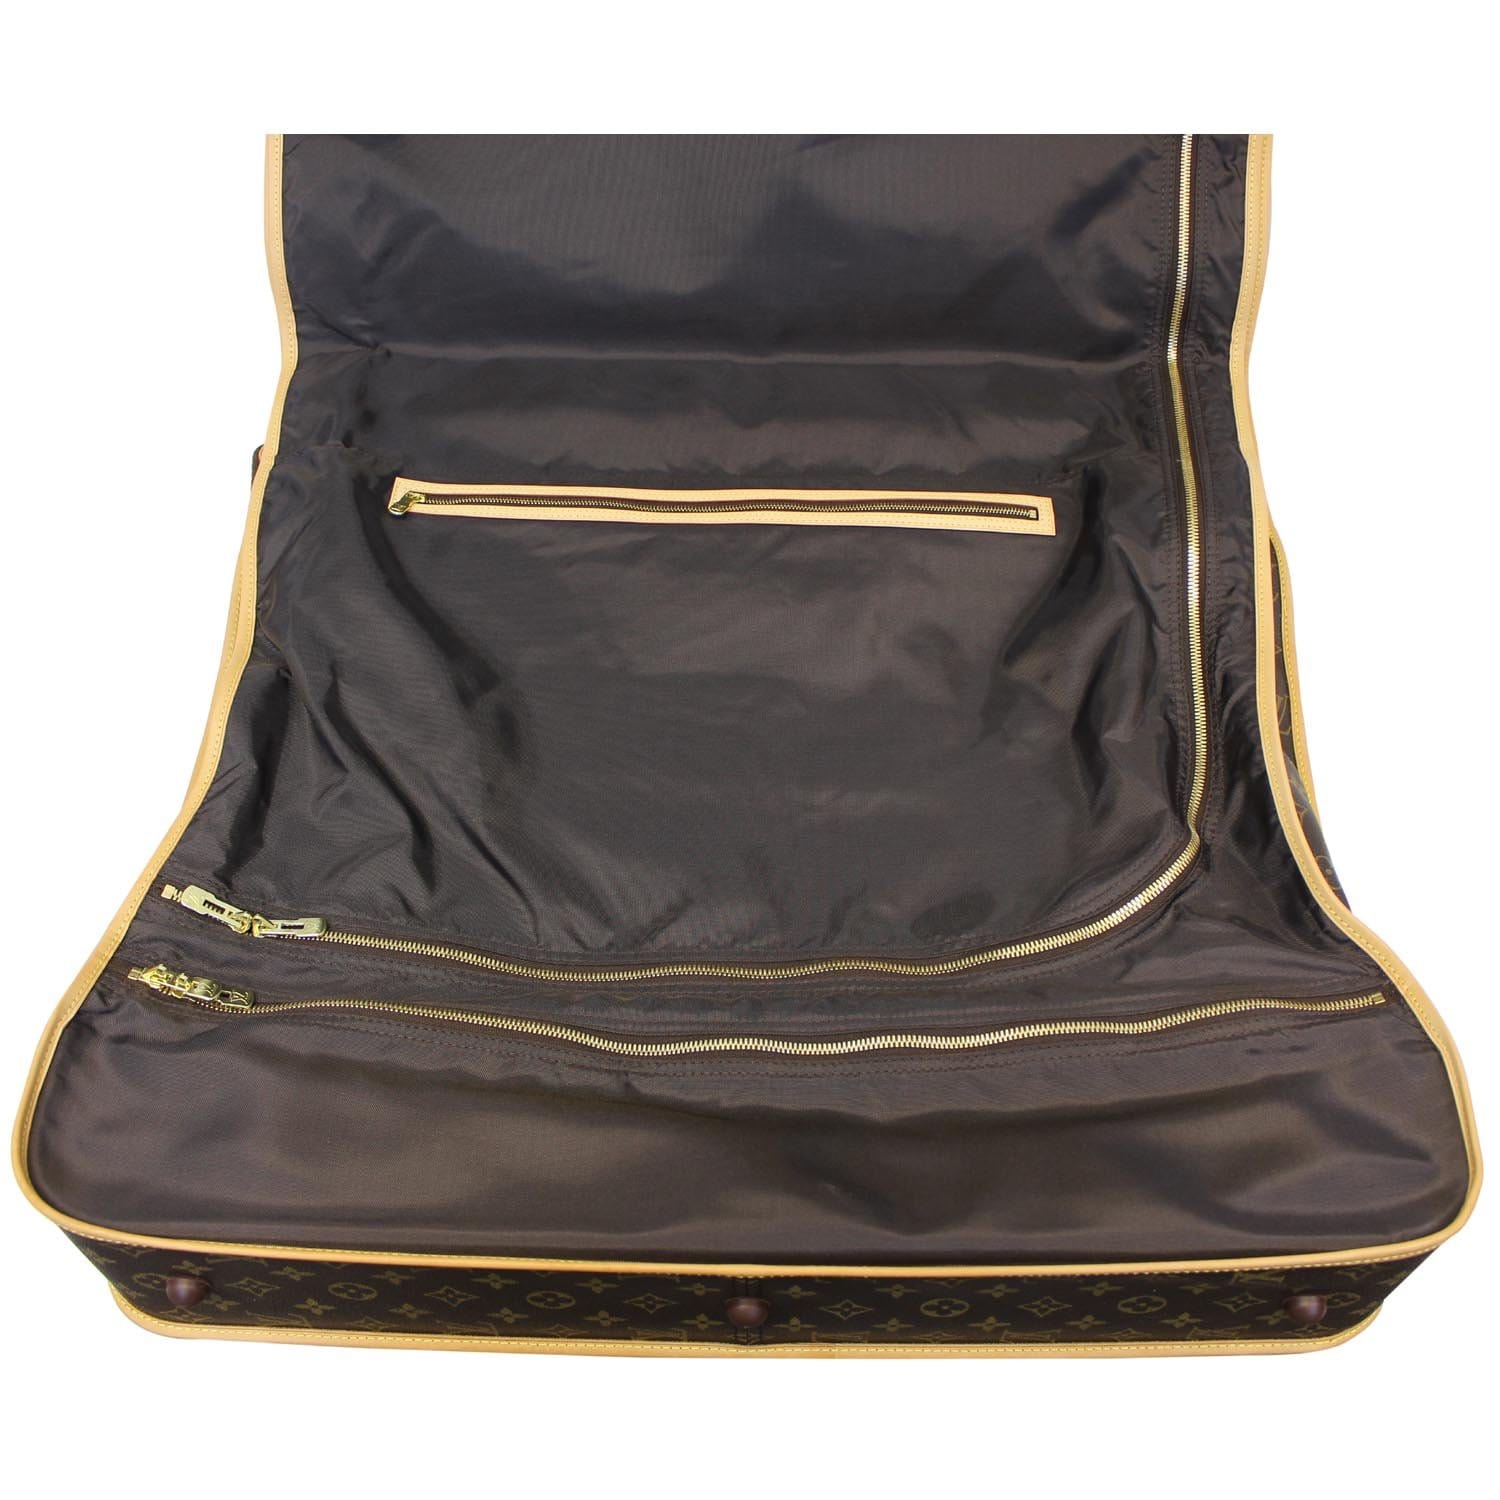 At Auction: Louis Vuitton, LOUIS VUITTON GARMENT BAG LUGGAGE WITH NATURAL  LEATHER TRIM. SAKS FIFTH AVENUE METAL TAG. FROM ESTAT